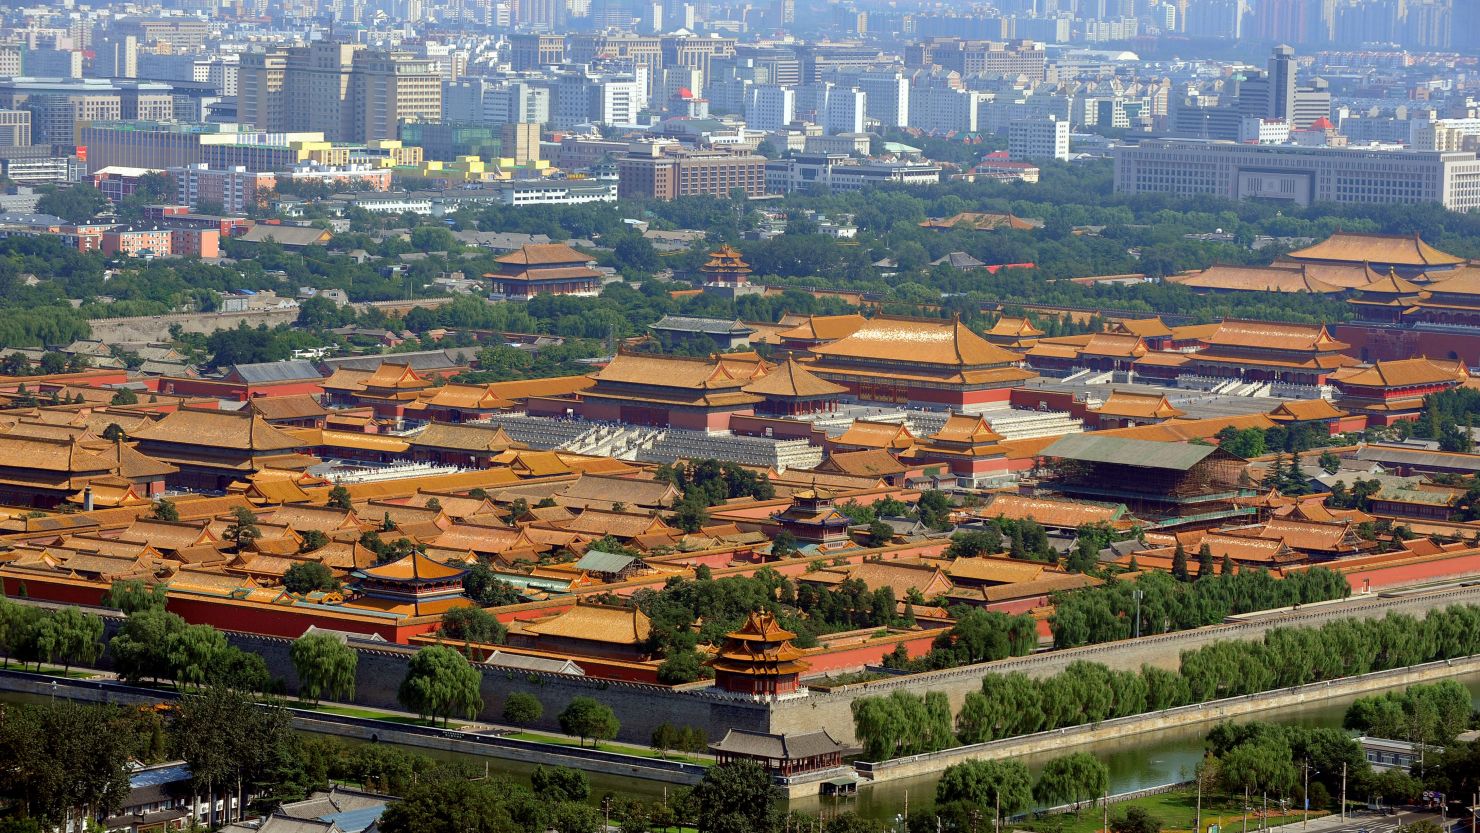 This aerial photo taken on August 2, 2008 shows Beijing's Forbidden City and new skyscrapers in the Chinese capital ahead of the Beijing 2008 Olympic Games.  Weather forecasters predicted thunder and rain in Beijing on the day of the Olympic opening ceremony and warned that typhoons could disrupt events in other host cities.   AFP PHOTO/GOH CHAI HIN        (Photo credit should read GOH CHAI HIN/AFP via Getty Images)